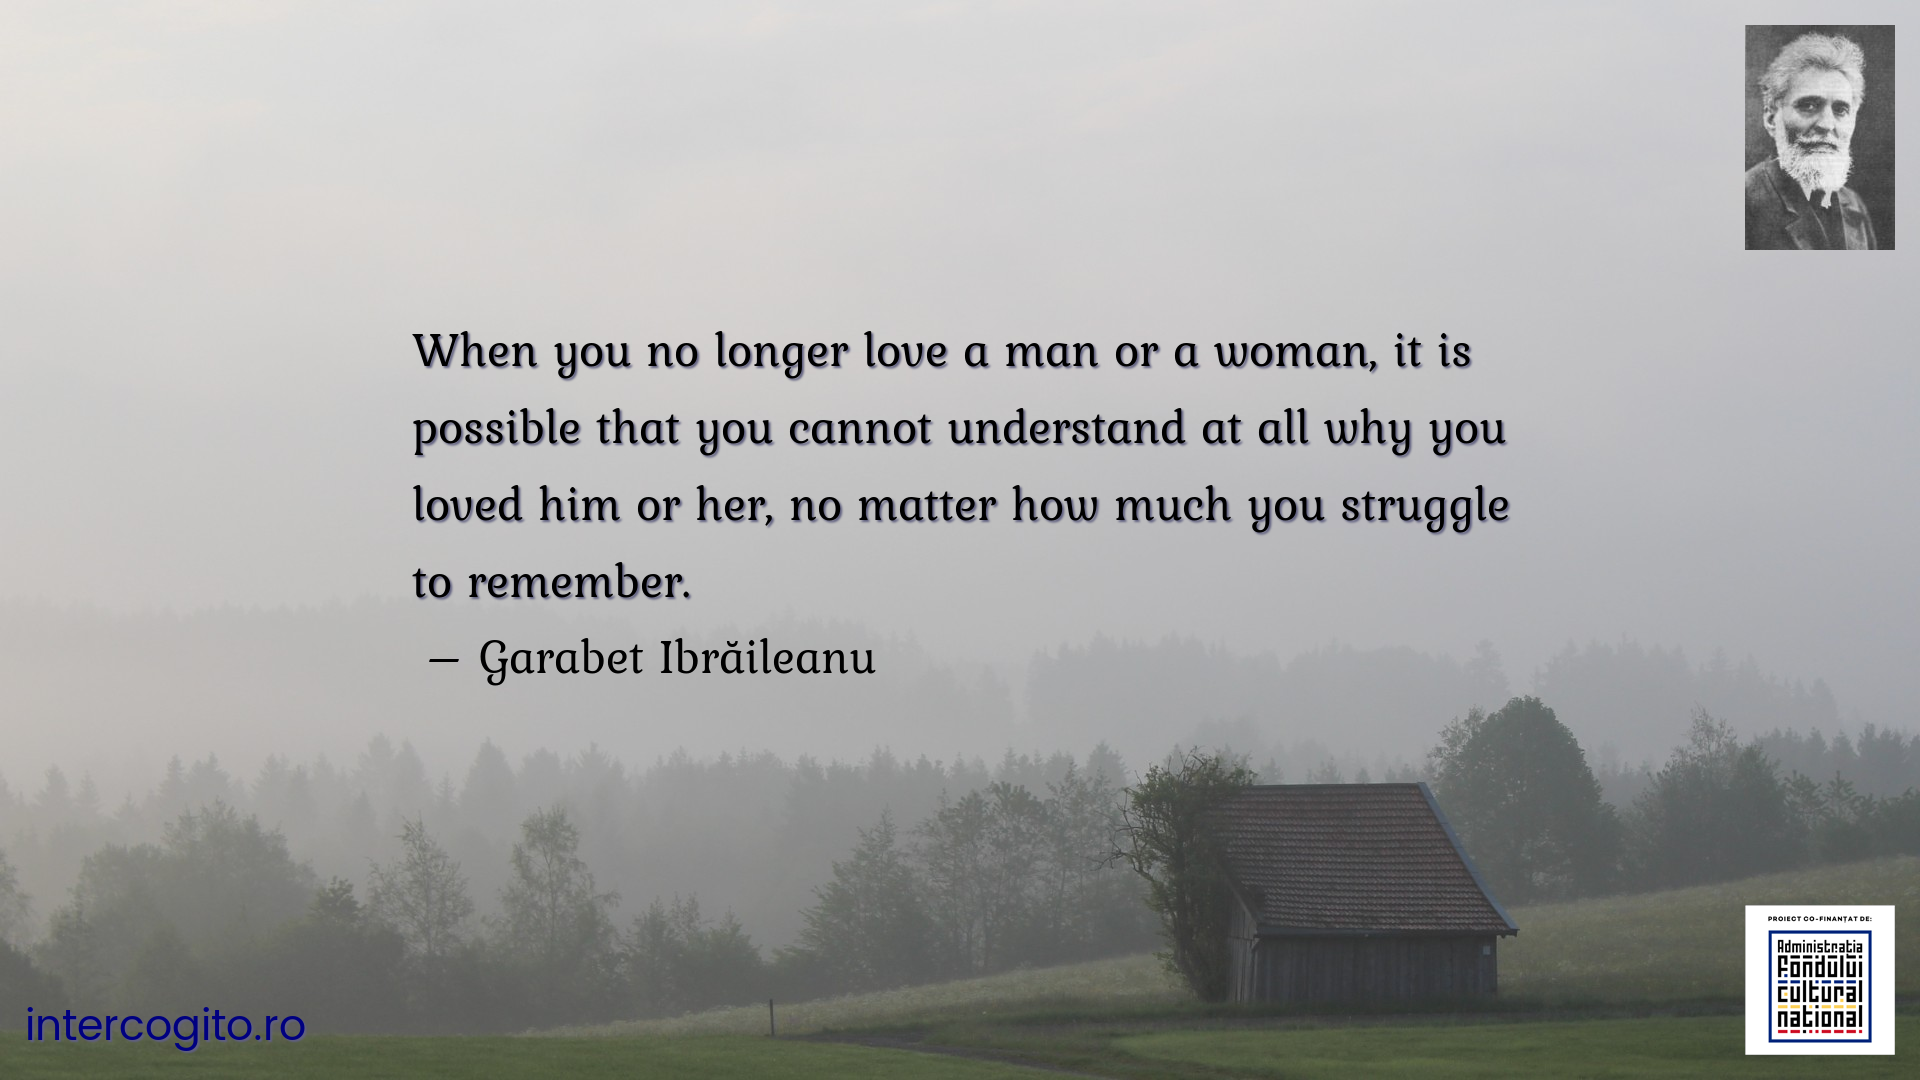 When you no longer love a man or a woman, it is possible that you cannot understand at all why you loved him or her, no matter how much you struggle to remember.